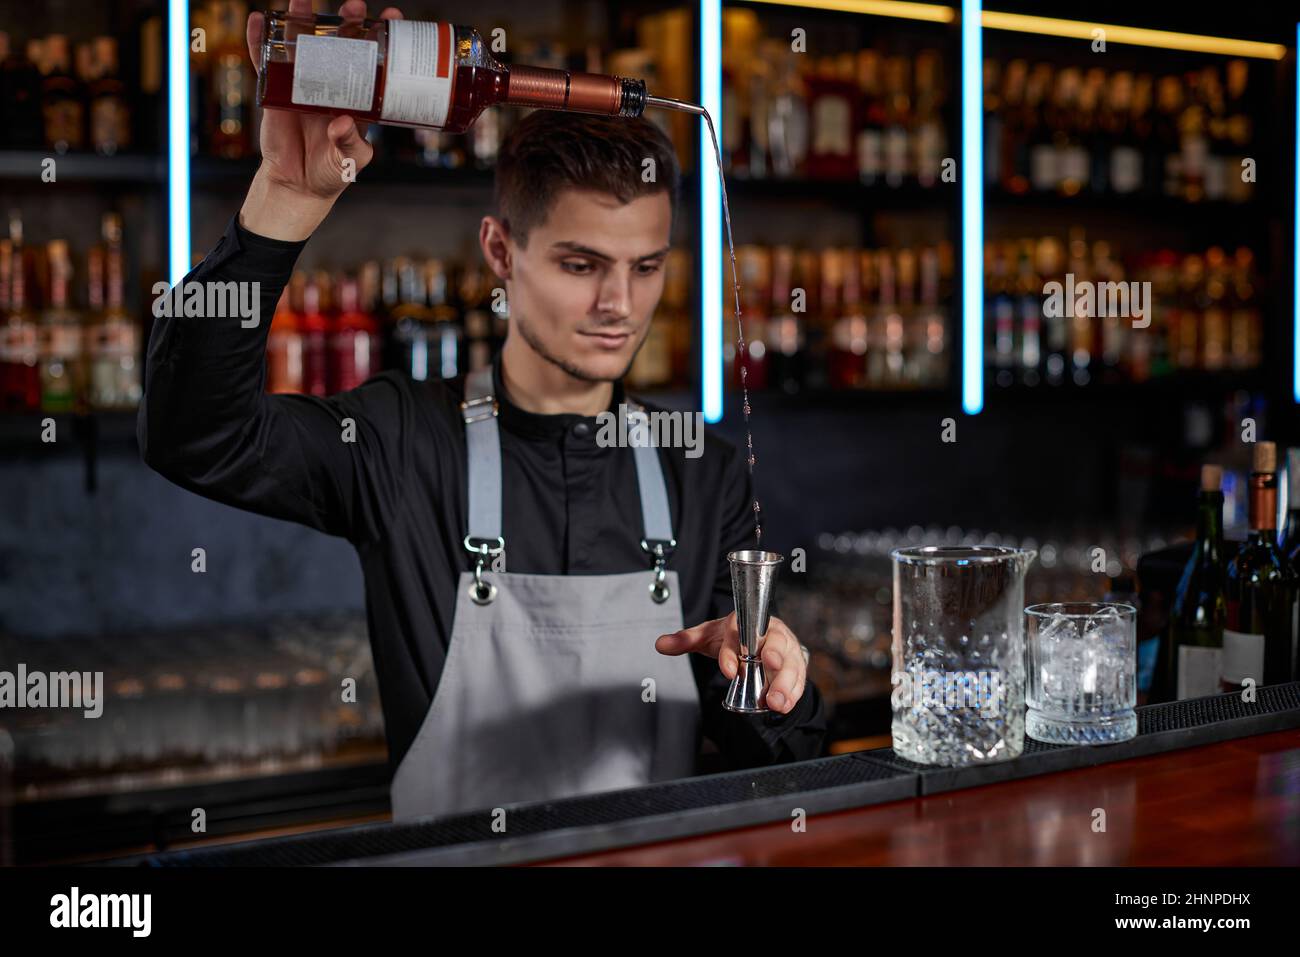 Bartender in apron adds ingredient to glass Stock Photo